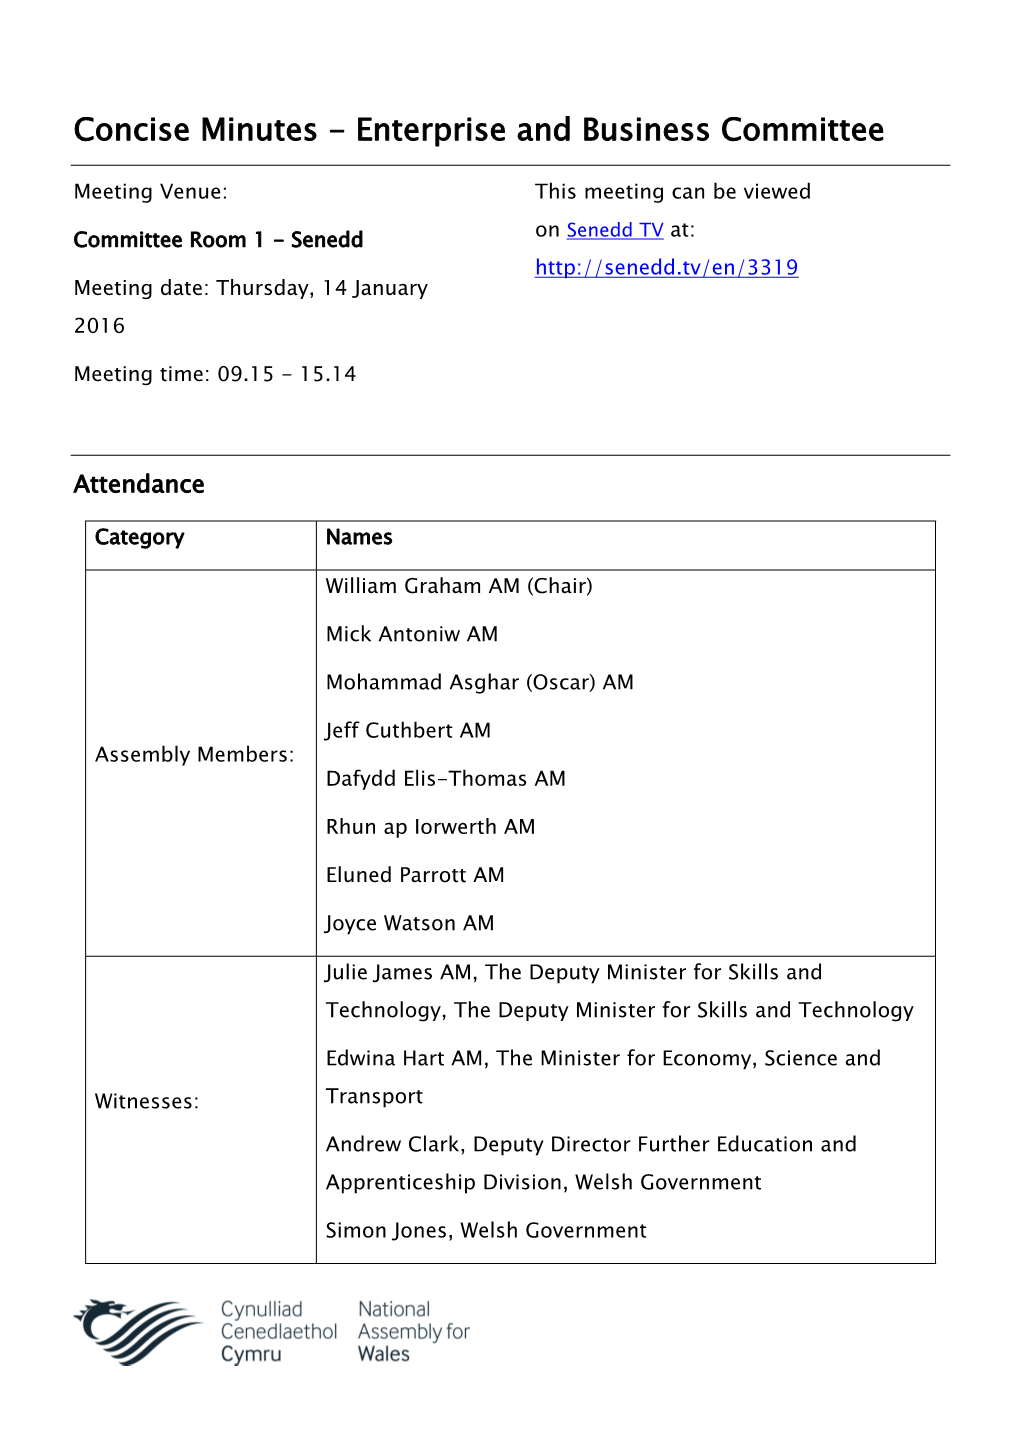 Concise Minutes - Enterprise and Business Committee